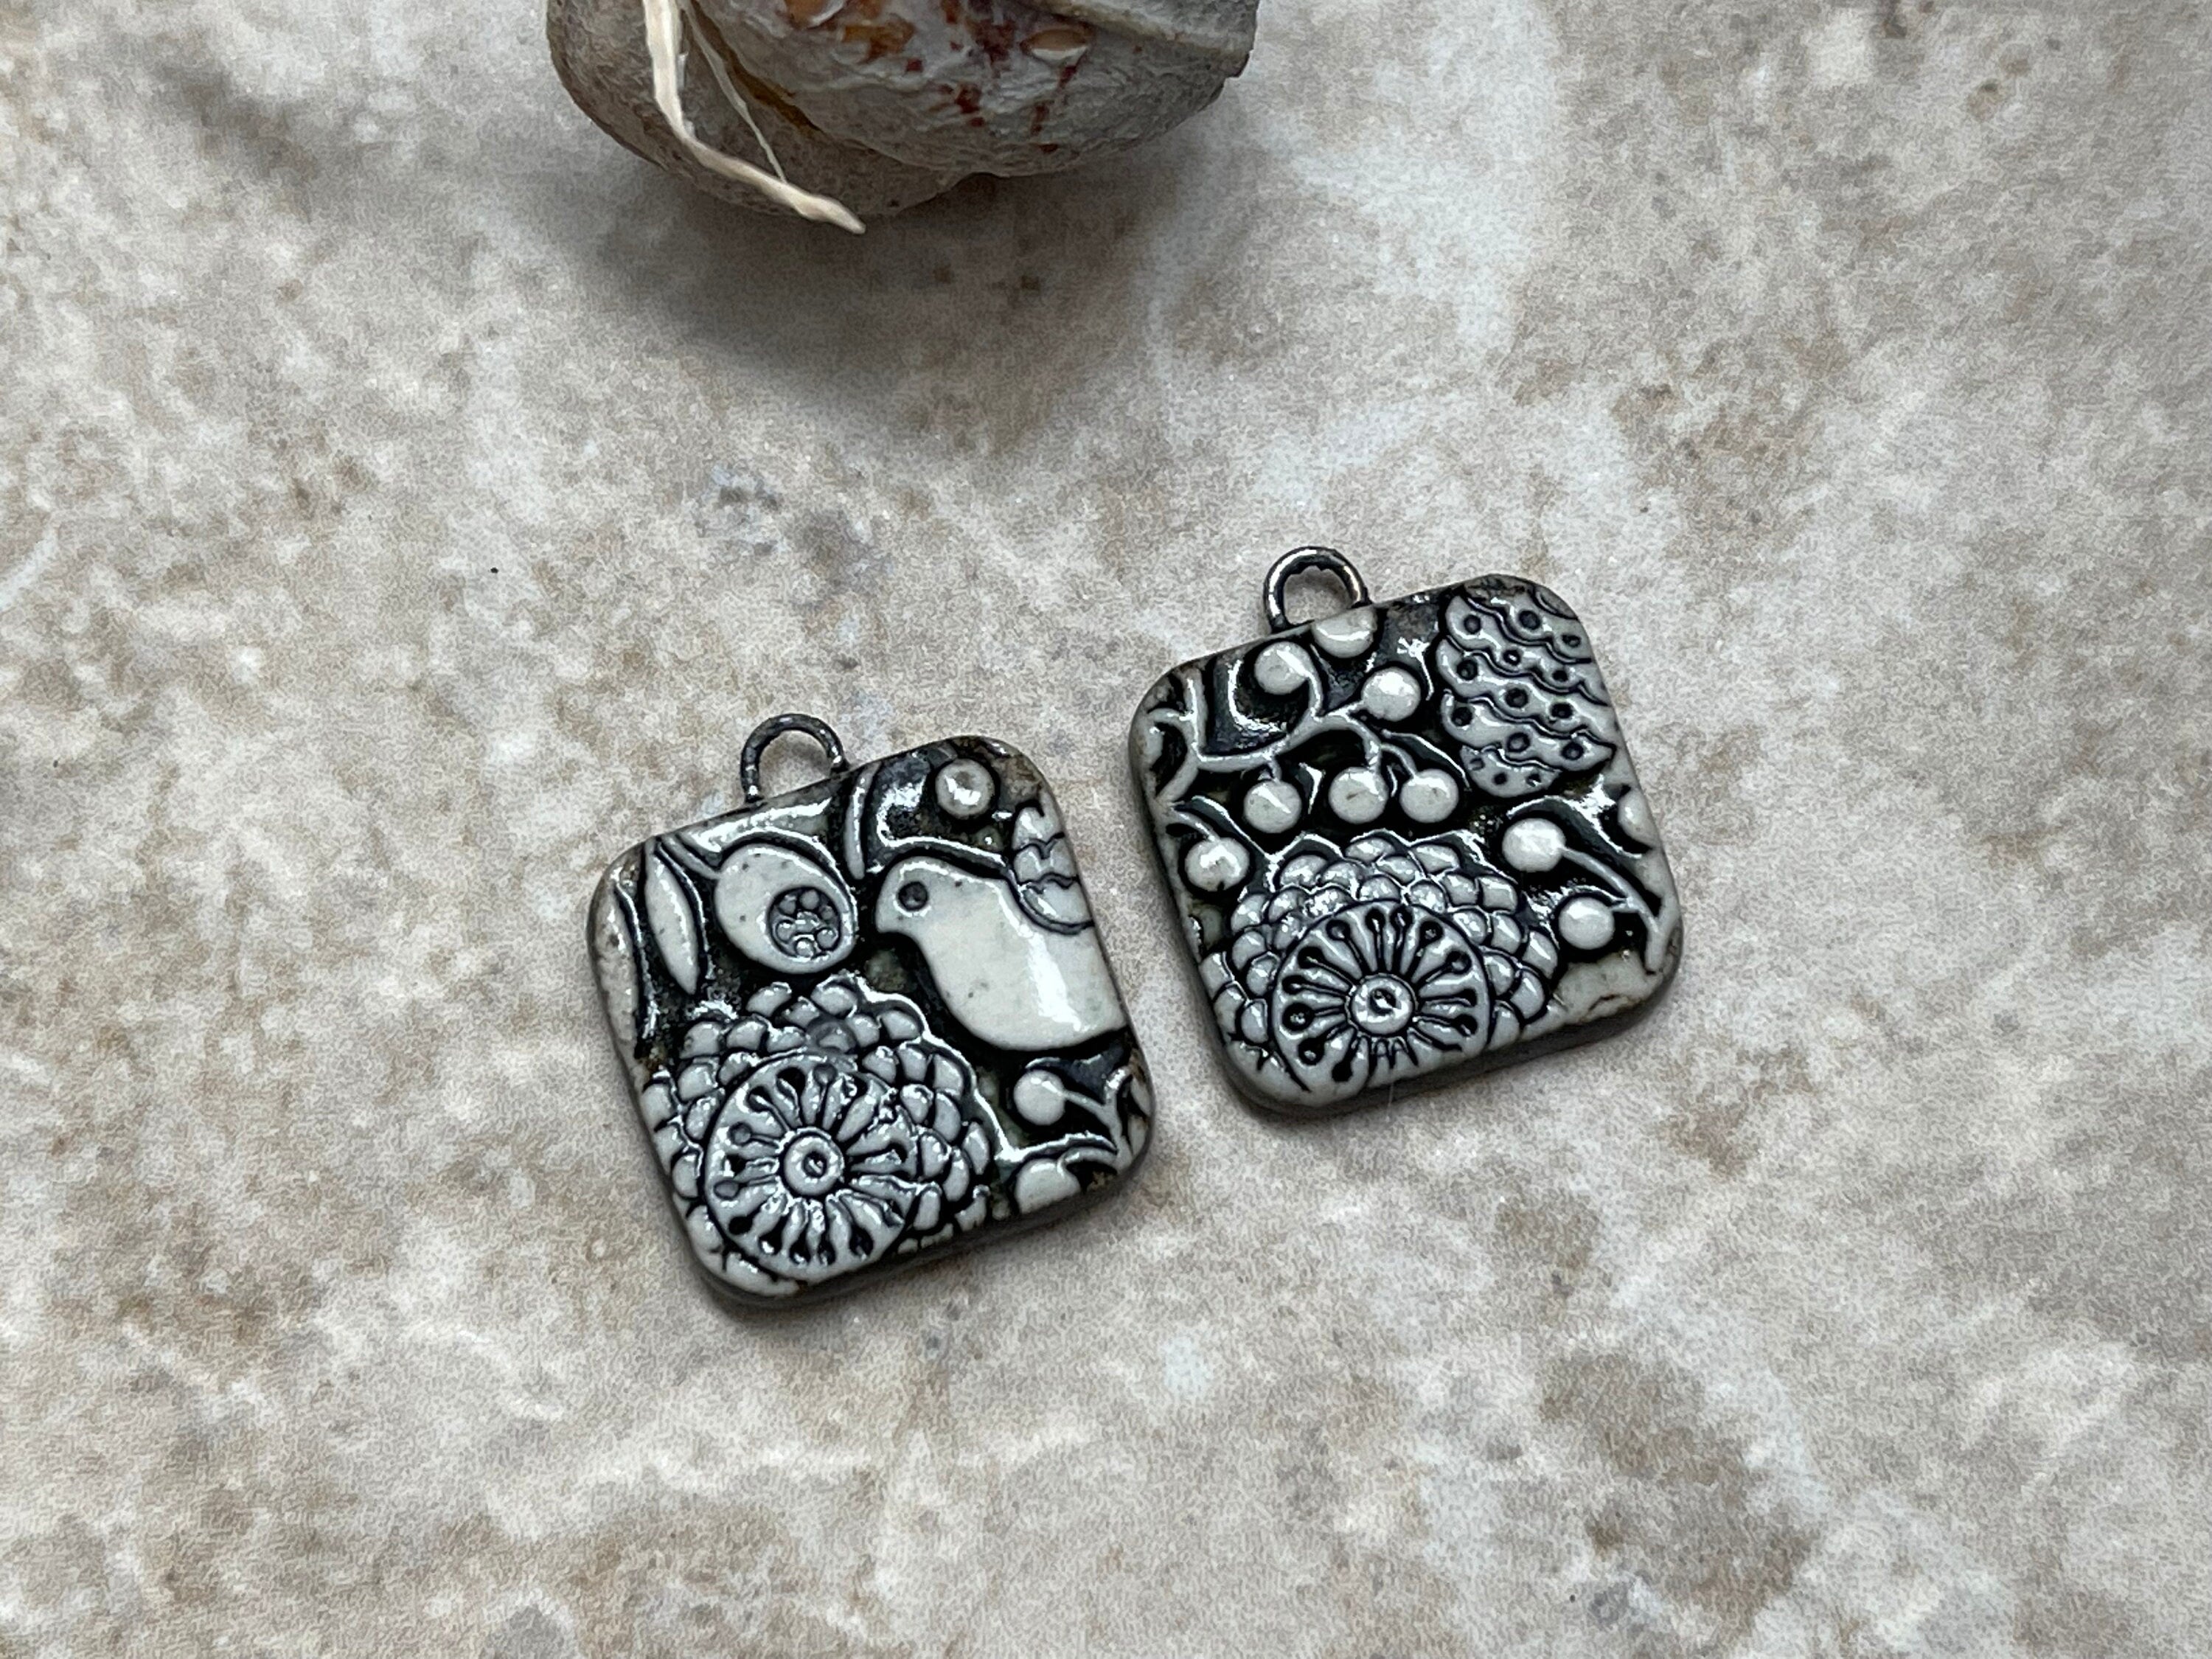 Black and White Charms, Scandinavian Bird and Rosette, Black Earring Bead Pair, Porcelain Ceramic Charms, Jewelry Components, Handmade